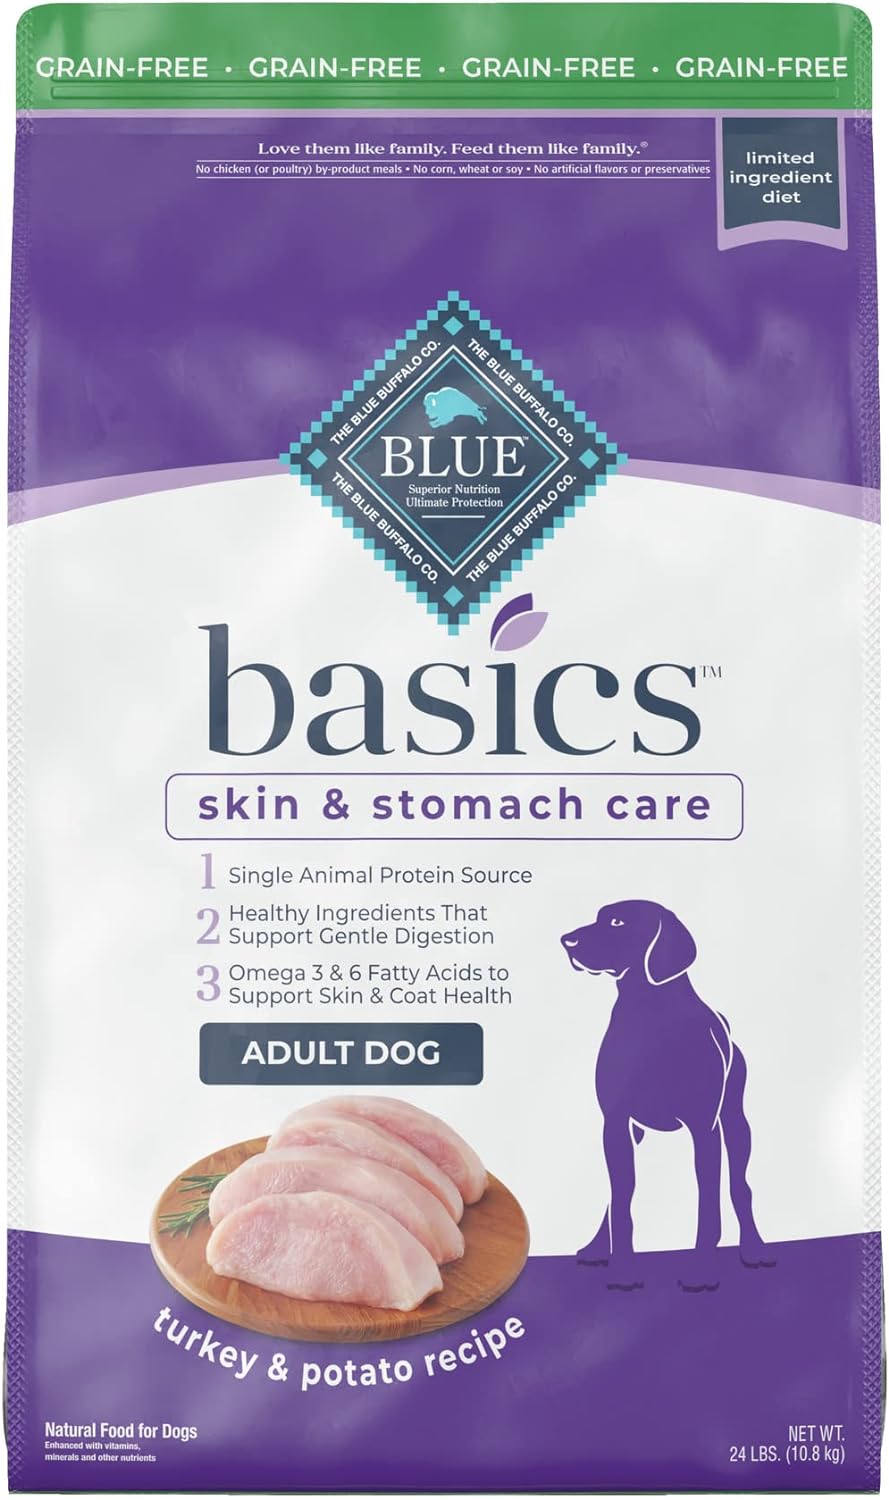 Blue Basics Limited Ingredient Diet Adult Grain-Free Turkey and Potato Recipe Dry Dog Food – Gallery Image 1